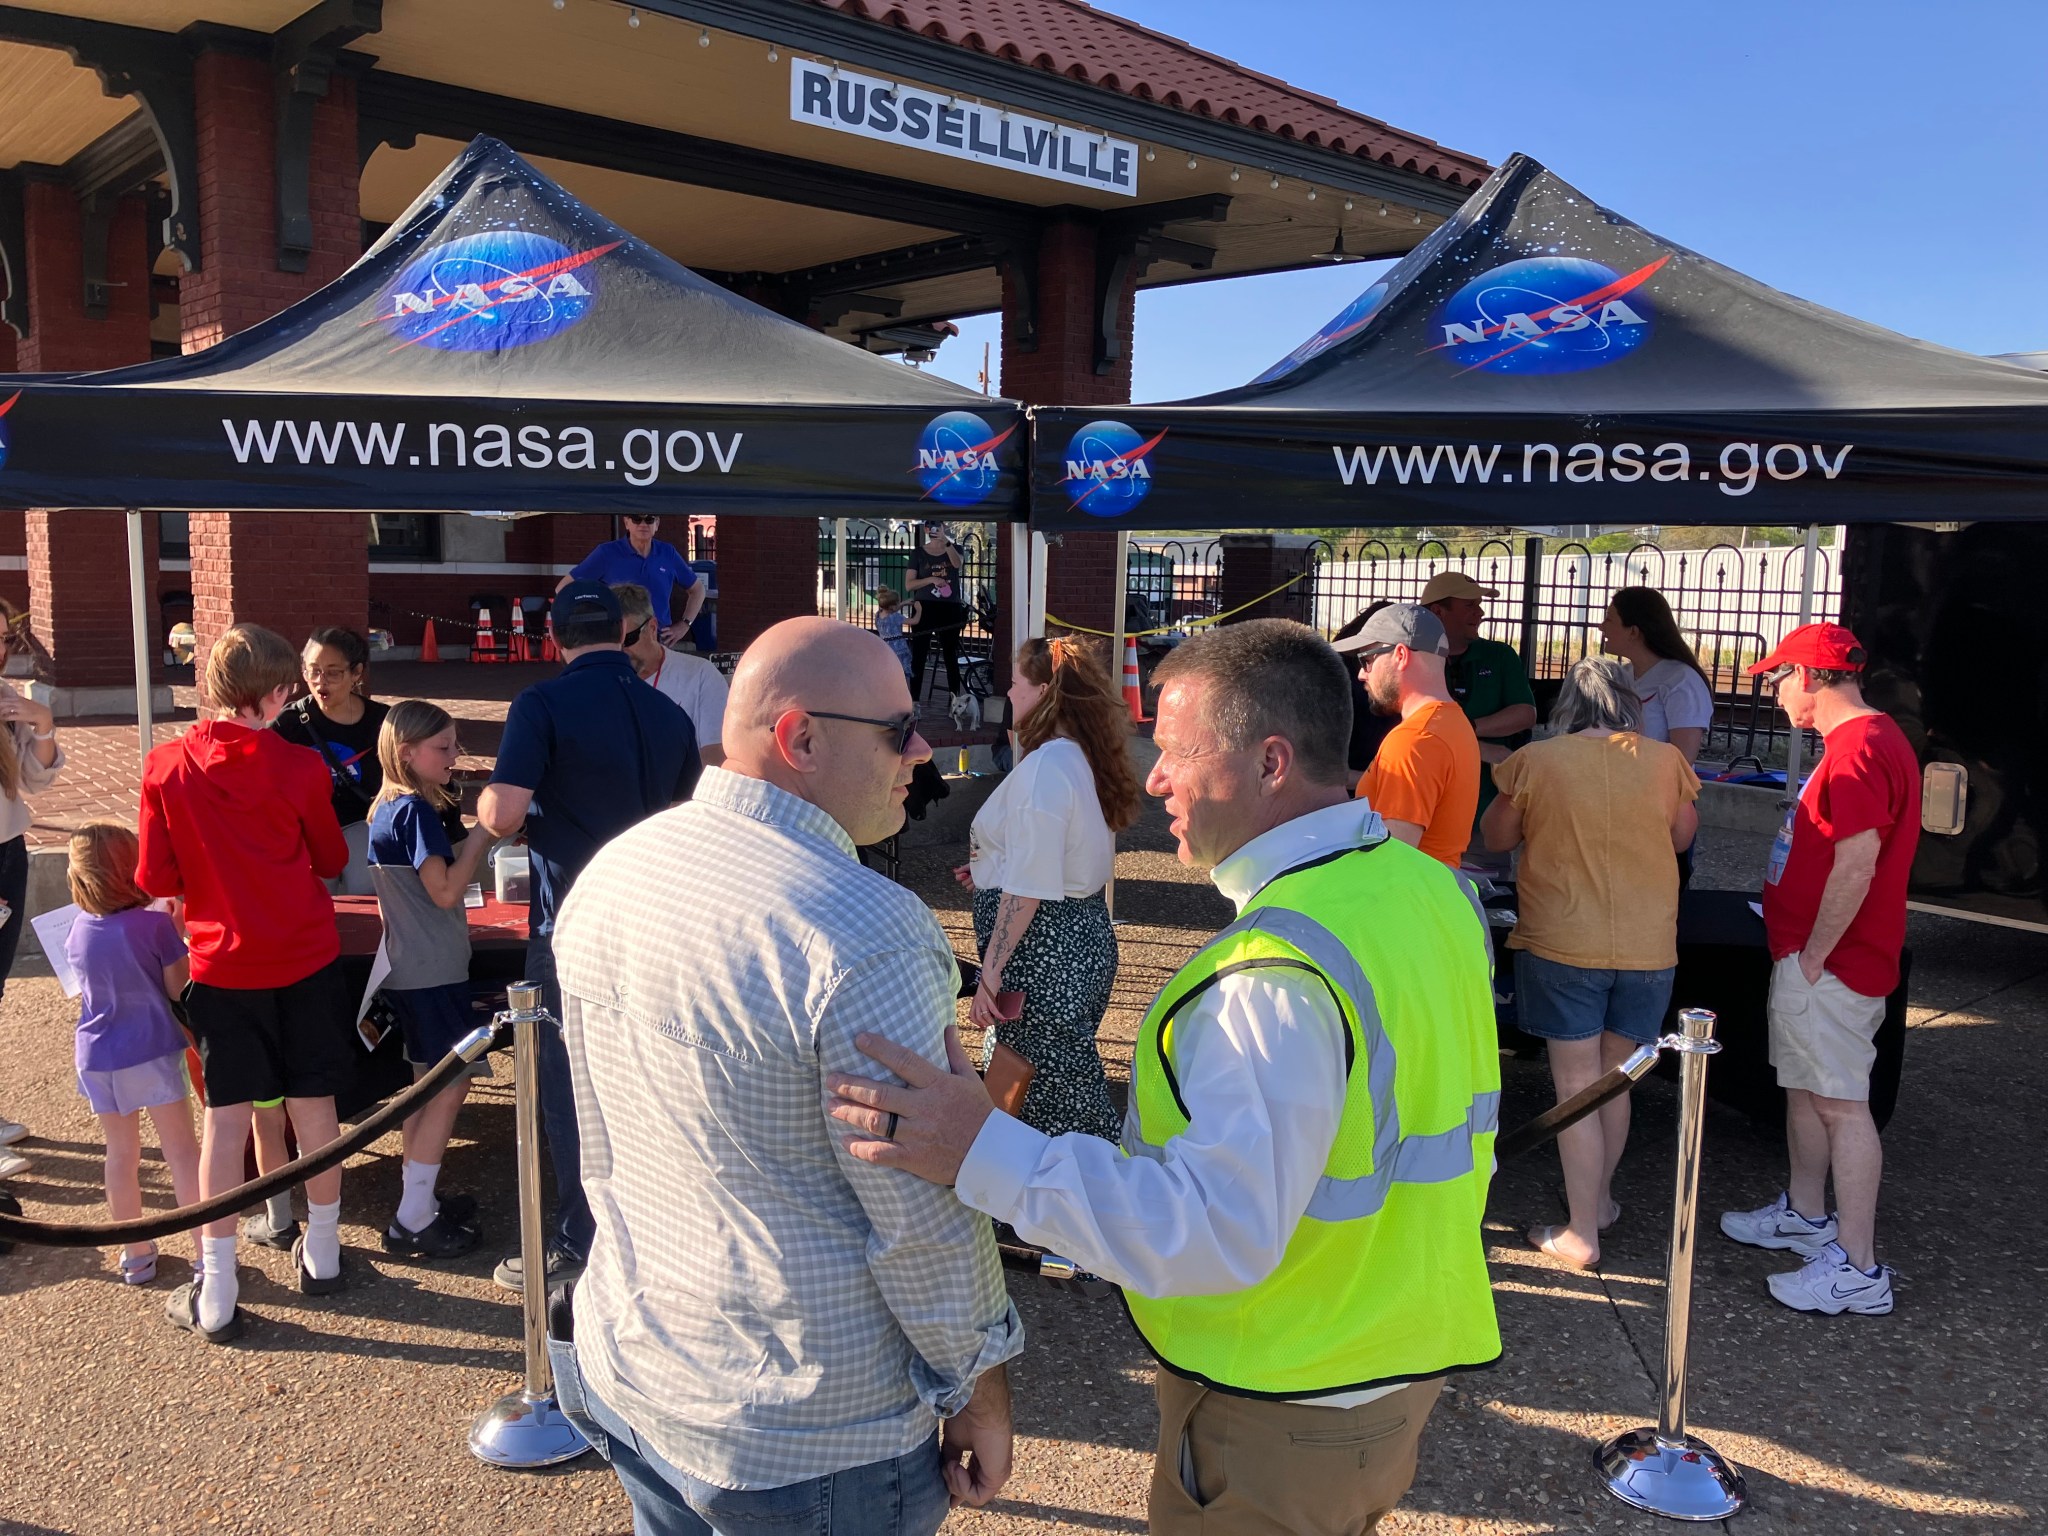 Marshall Center Director Joseph Pelfrey, left, greets Russellville, Arkansas, Mayor Fred Teague in front of NASA tents set up for visitors for the April 8 eclipse event.